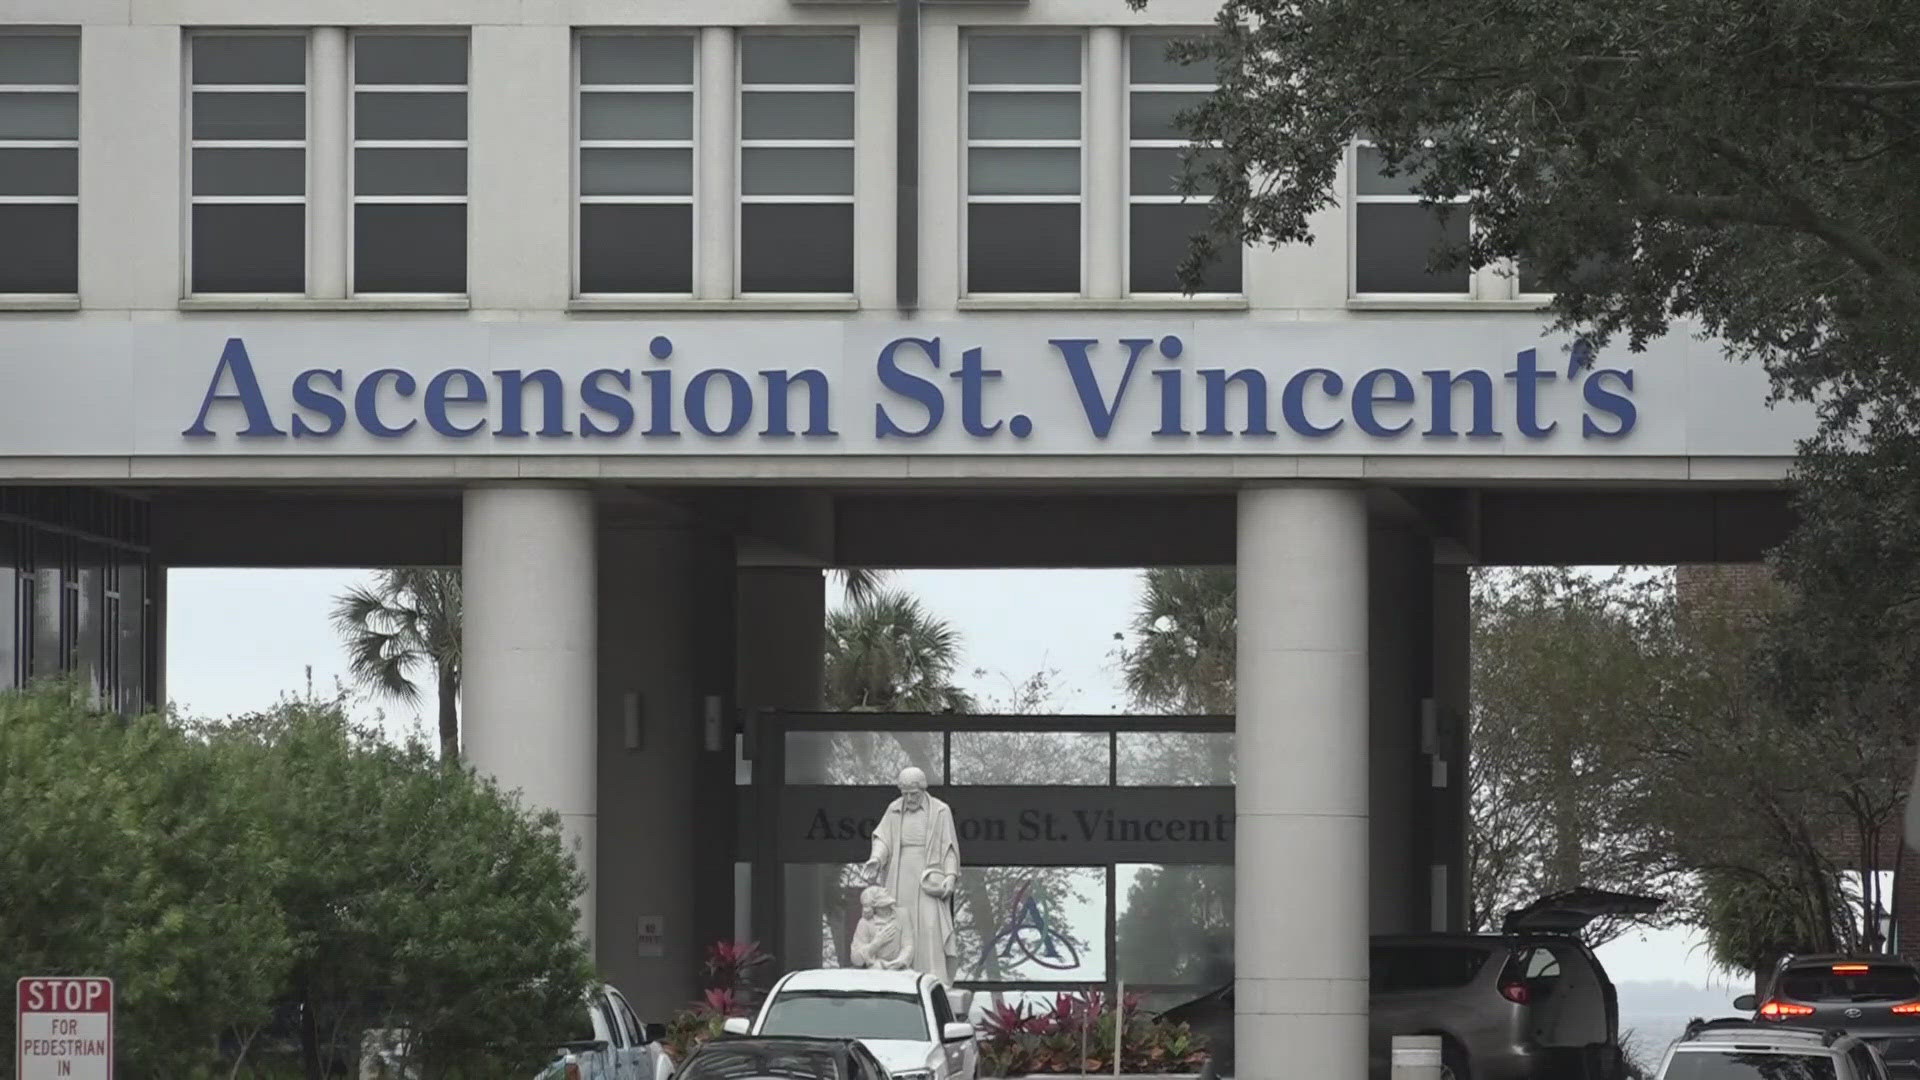 Ascension said in a statement Monday afternoon that cybersecurity experts were working "around the clock" to fix the systems affected by Wednesday's incident.